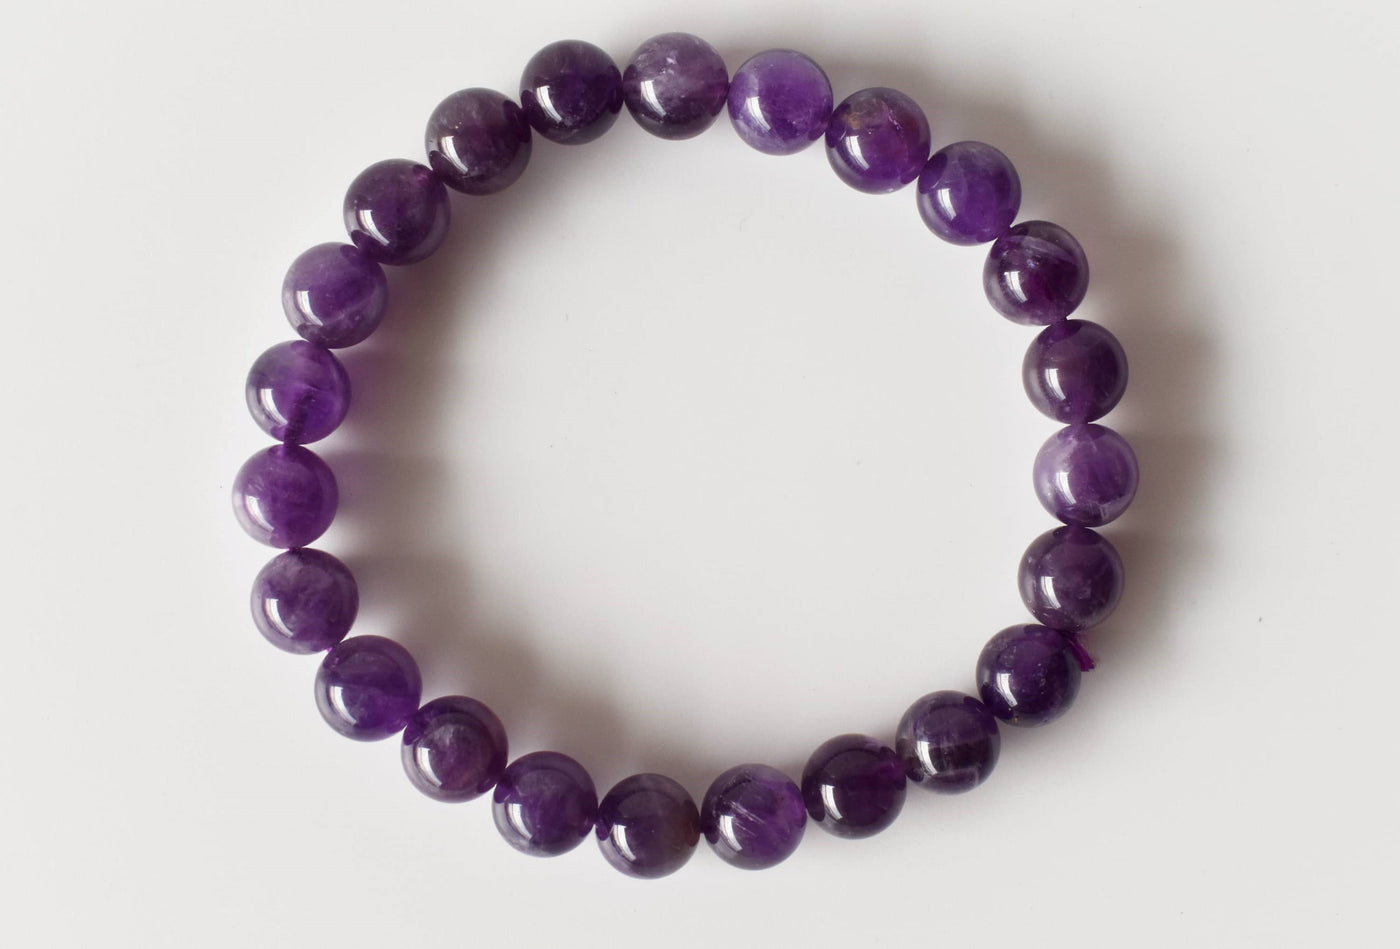 Amethyst Bracelet (Inspiration and Breaking Addictions)